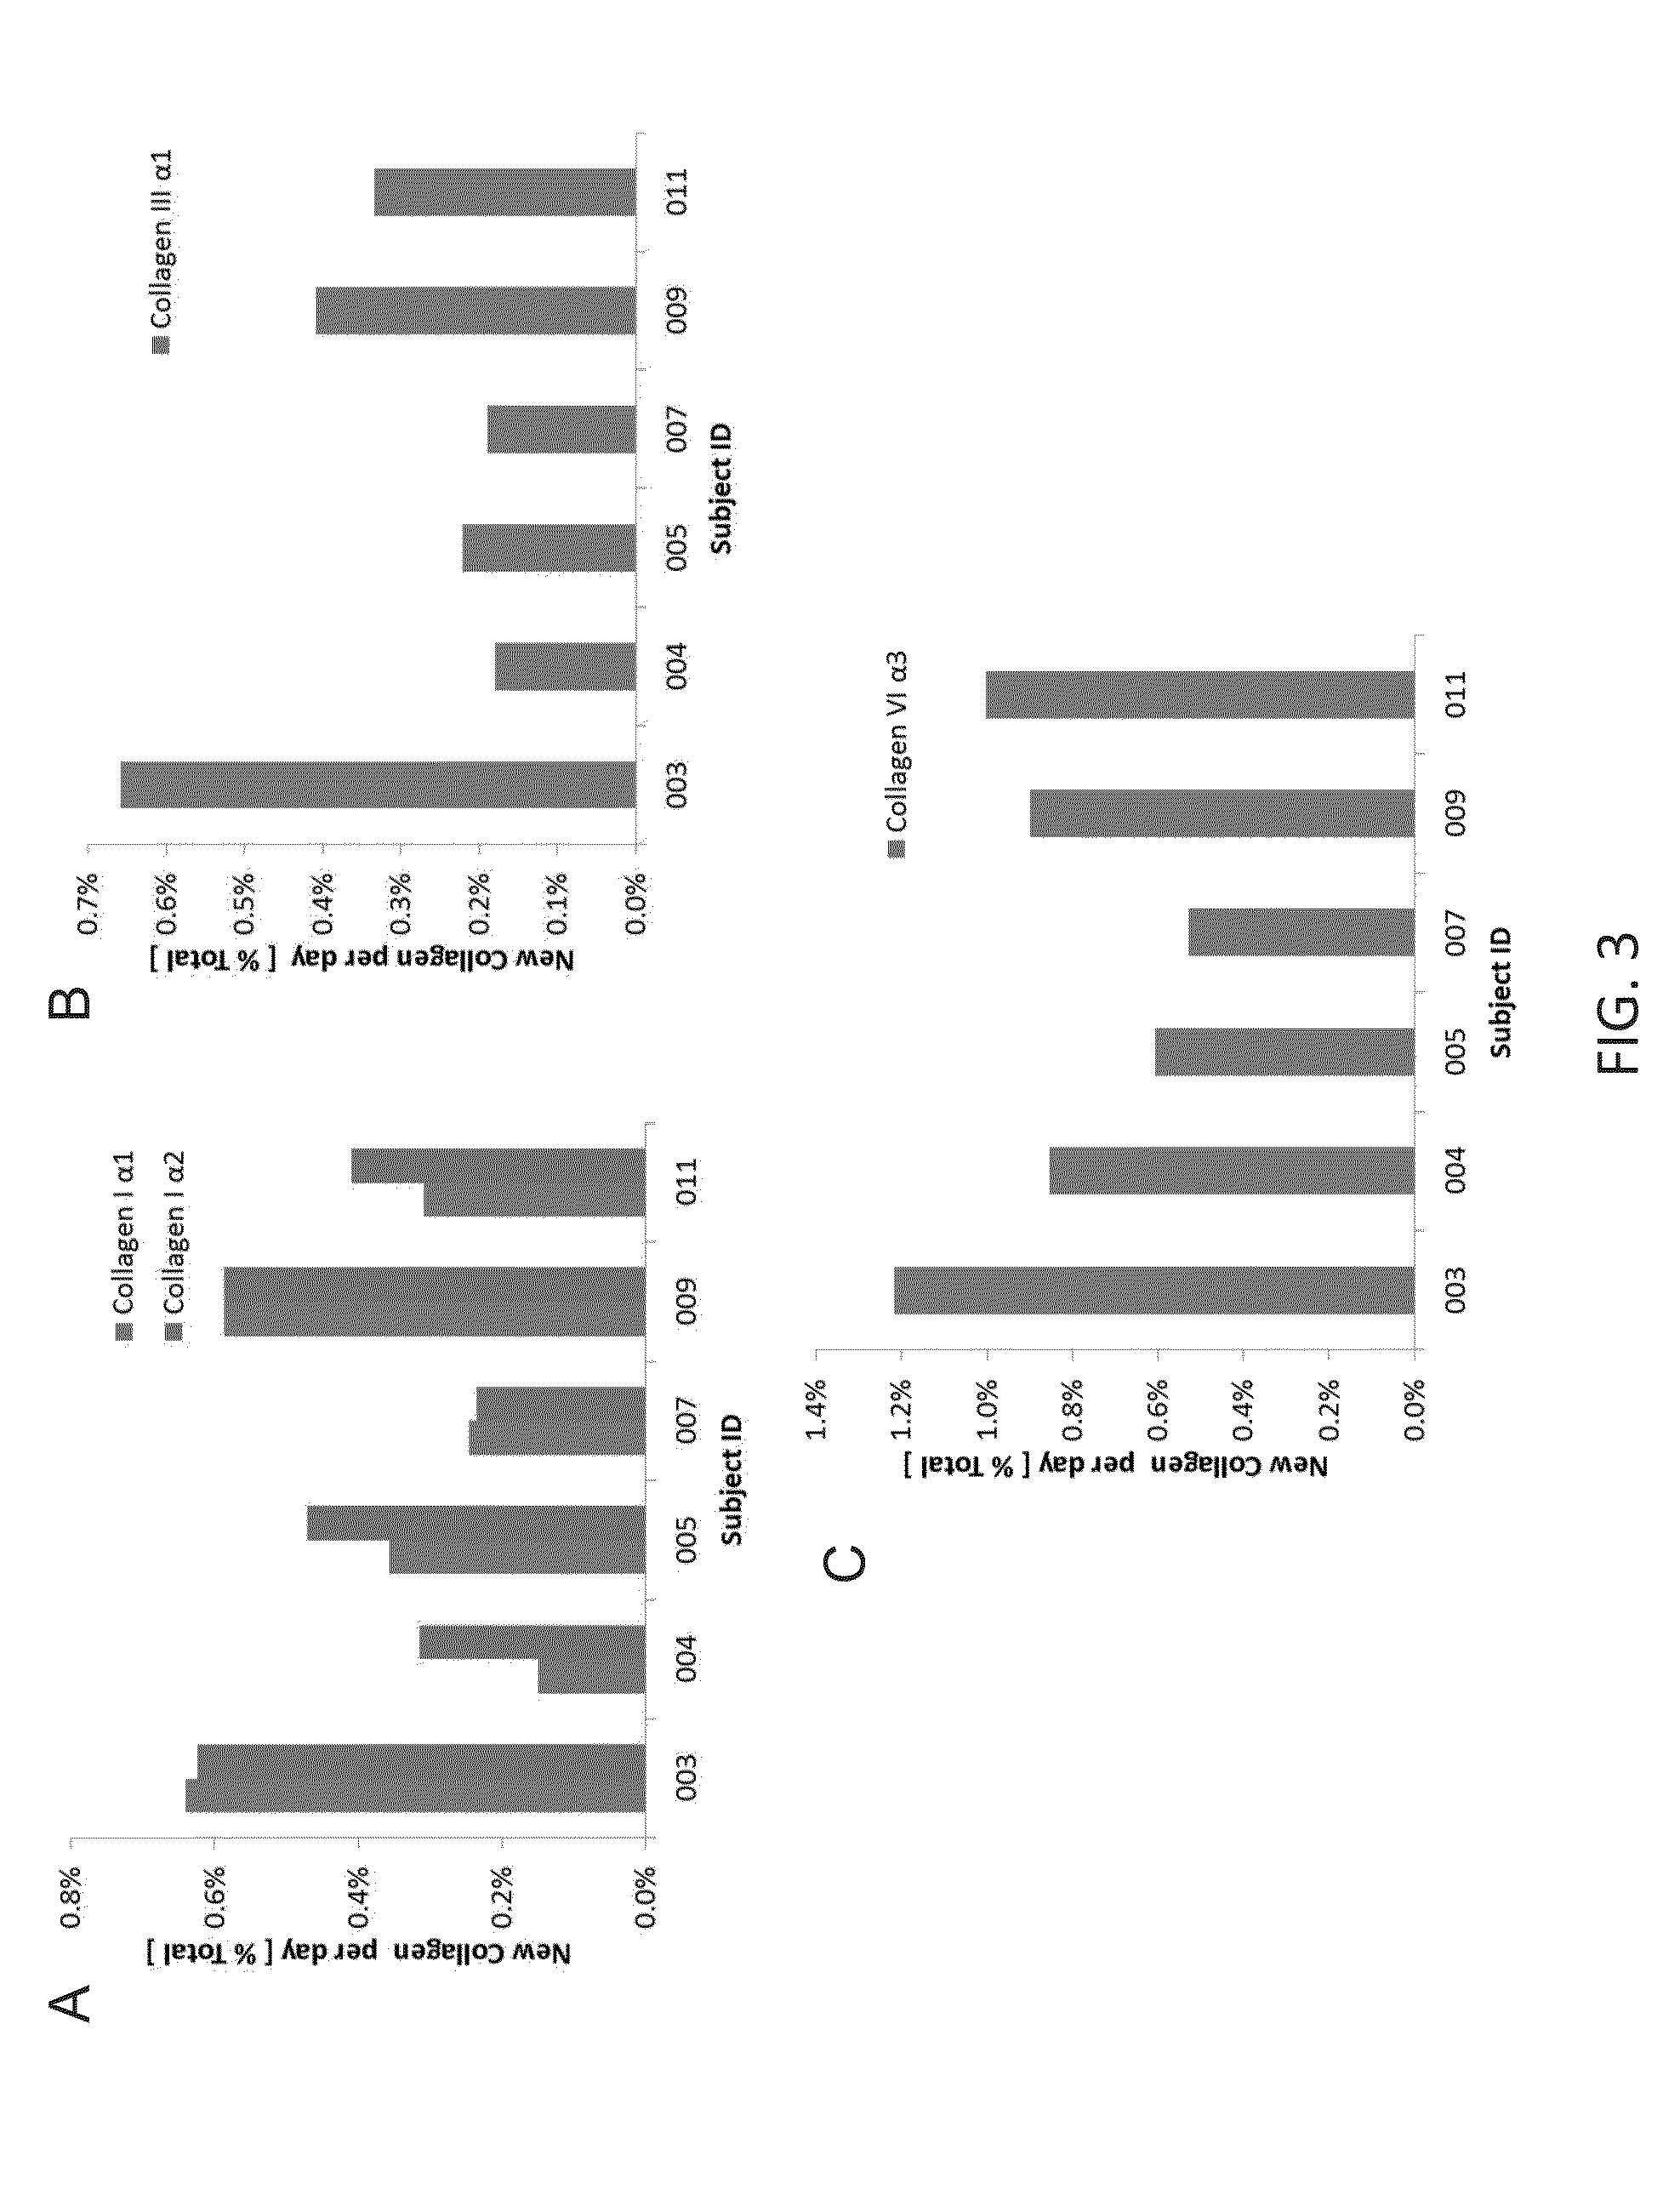 Method for replacing biomarkers of protein kinetics from tissue samples by biomarkers of protein kinetics from body fluids after isotopic labeling in vivo